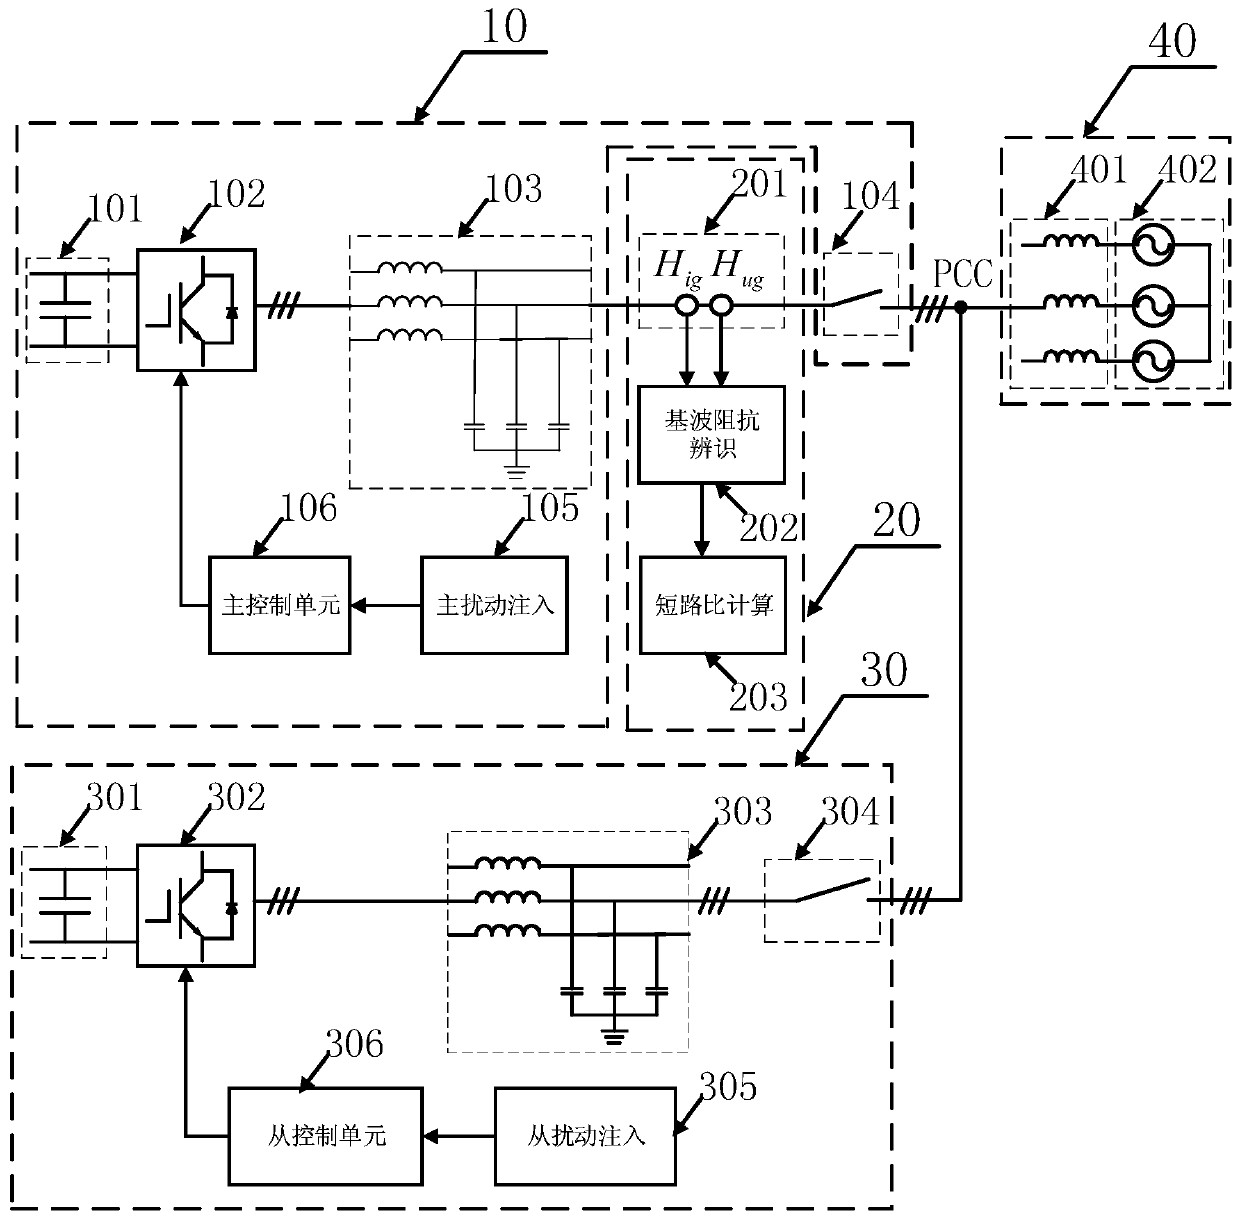 A grid-connected system short circuit ratio measurement method and device based on fundamental wave impedance identification